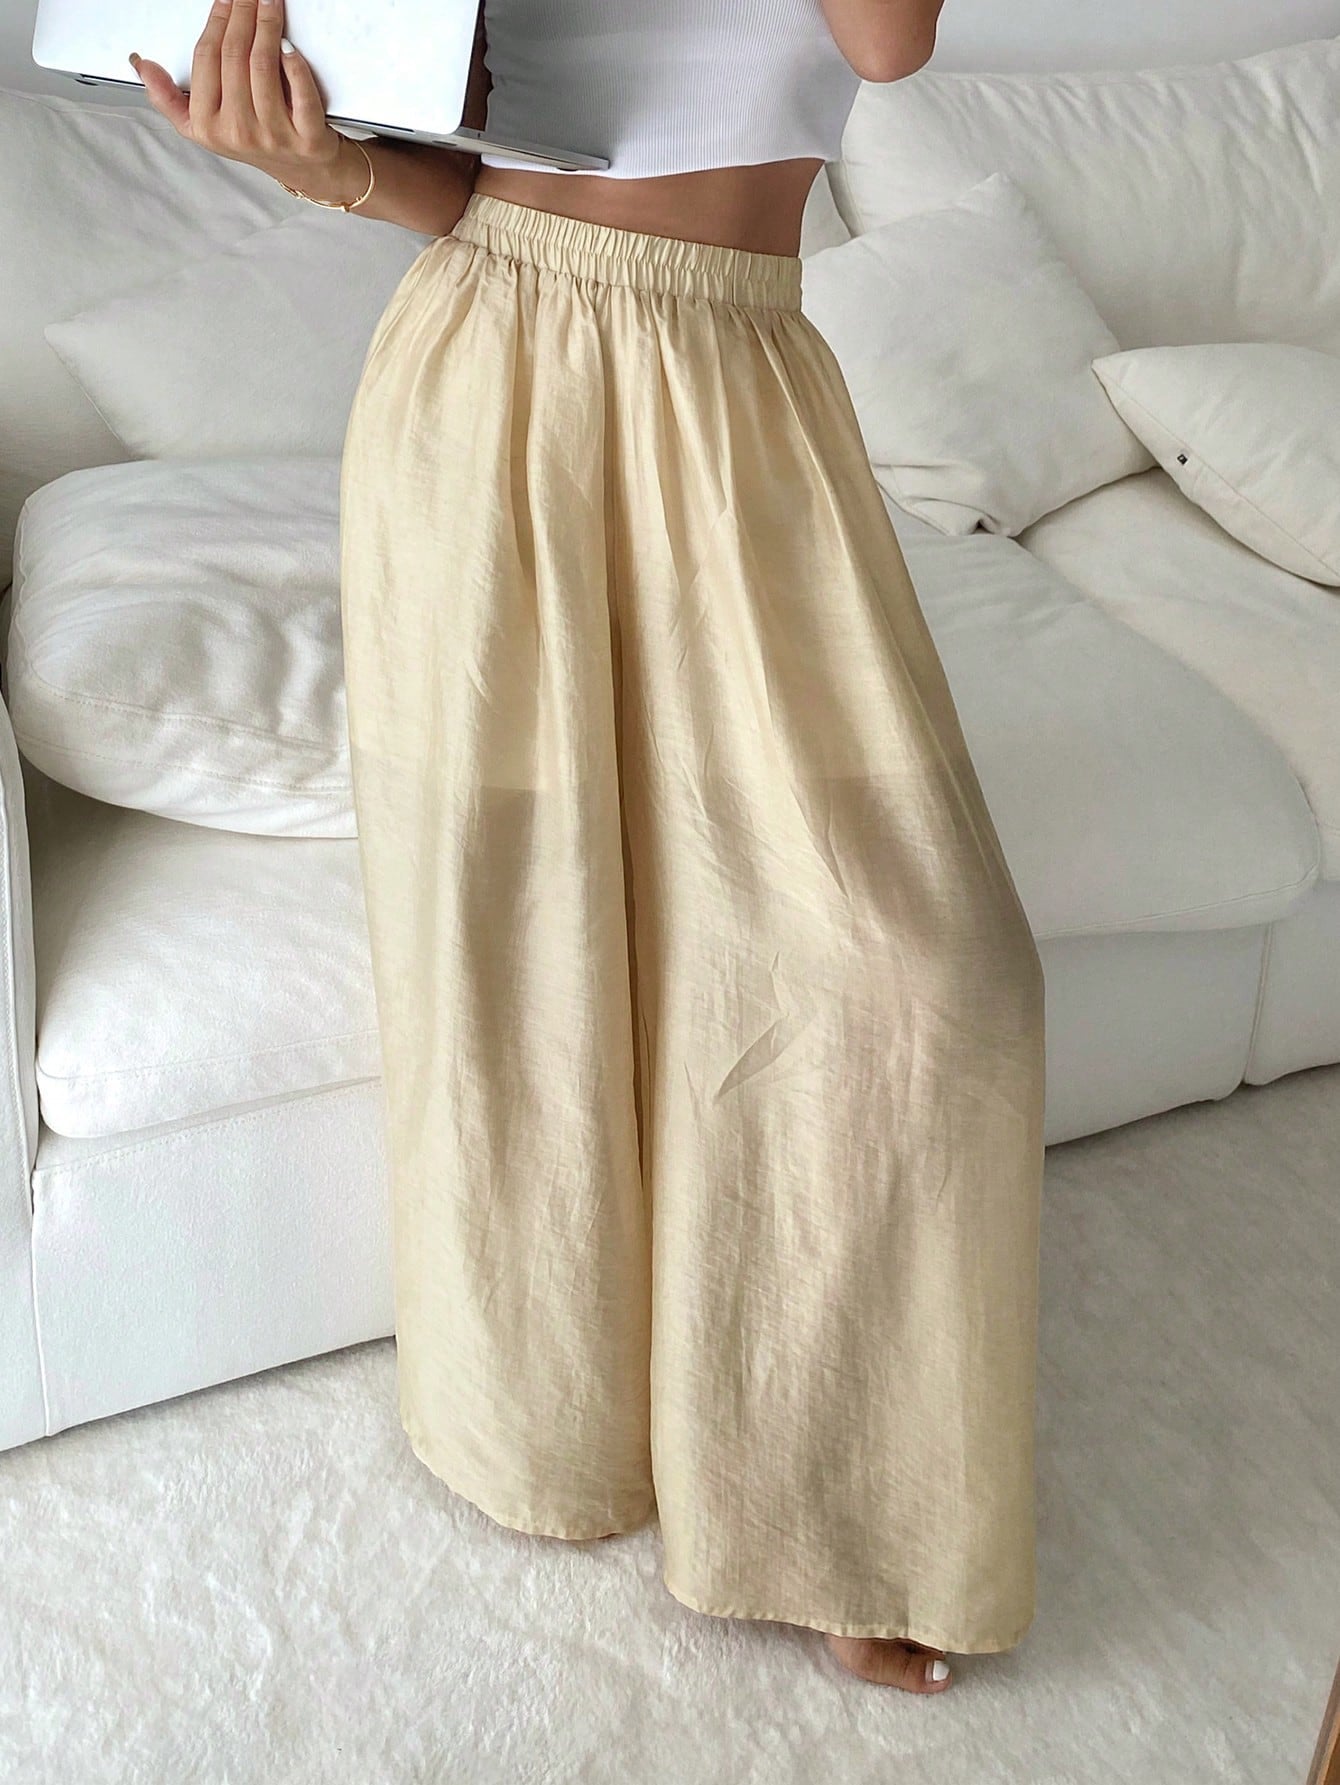 Spring/Summer Casual Loose Pantskirt Home Clothing